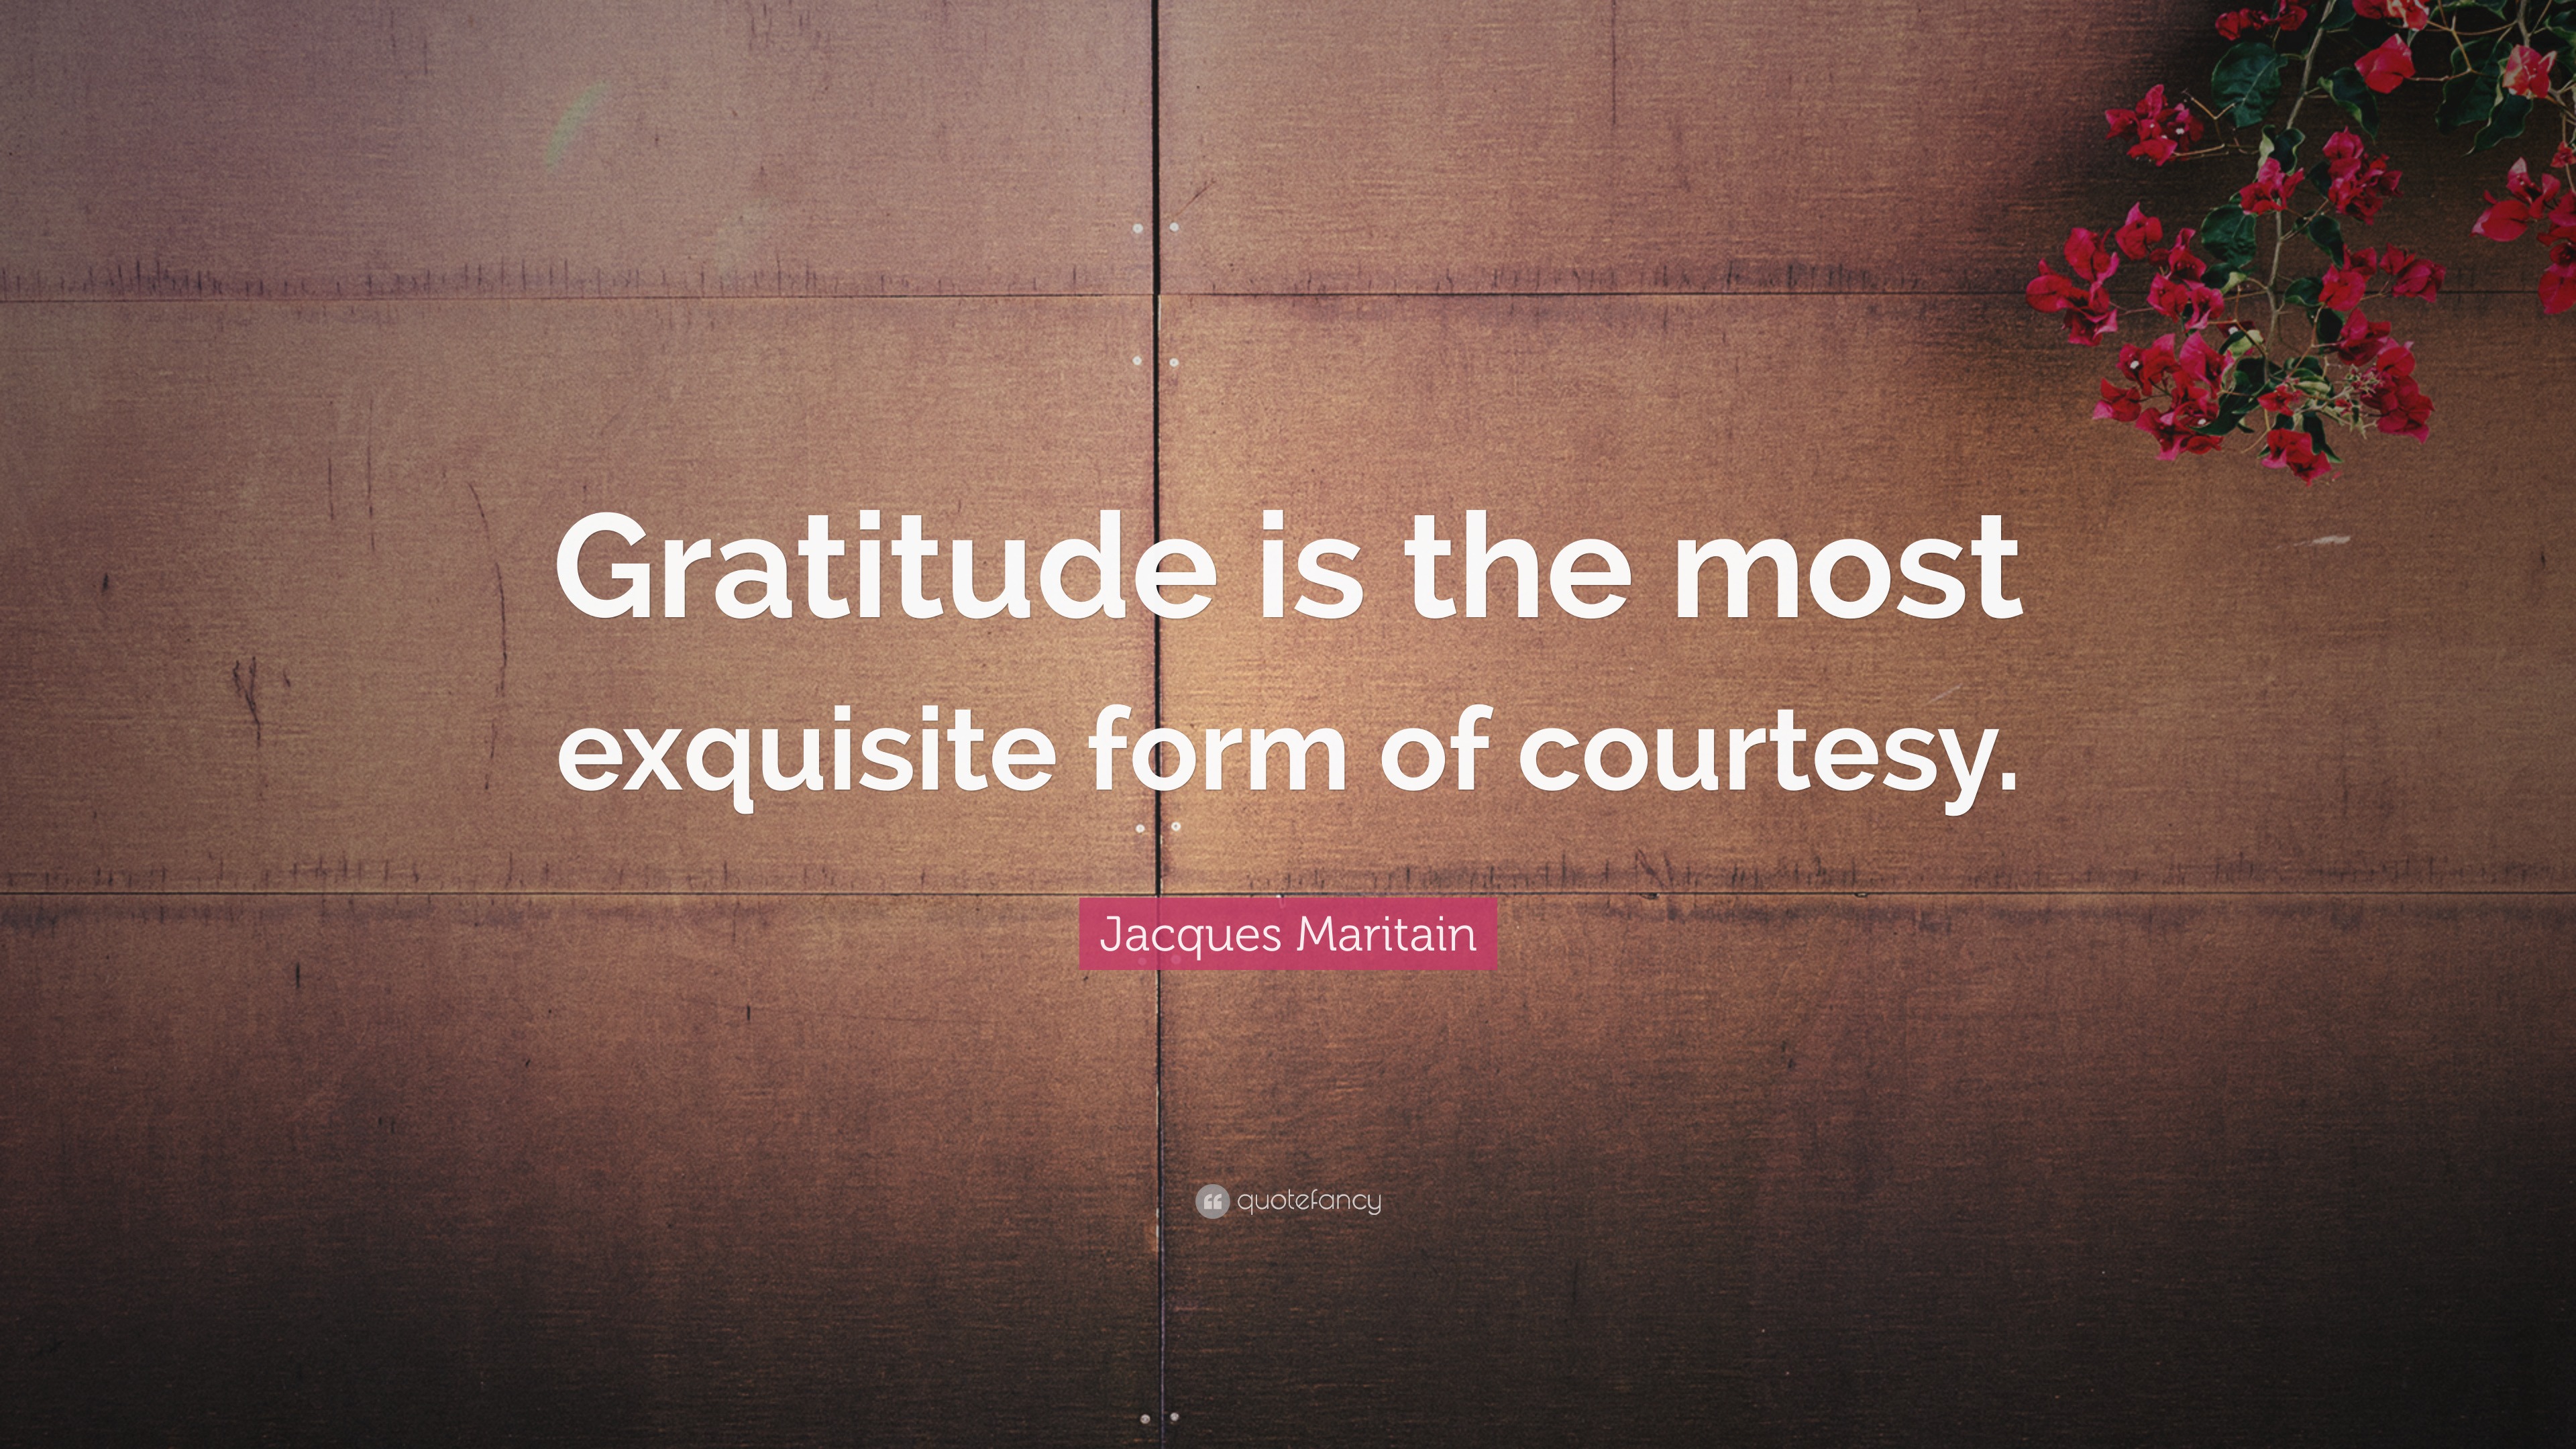 Jacques Maritain Quote: “Gratitude is the most exquisite form of